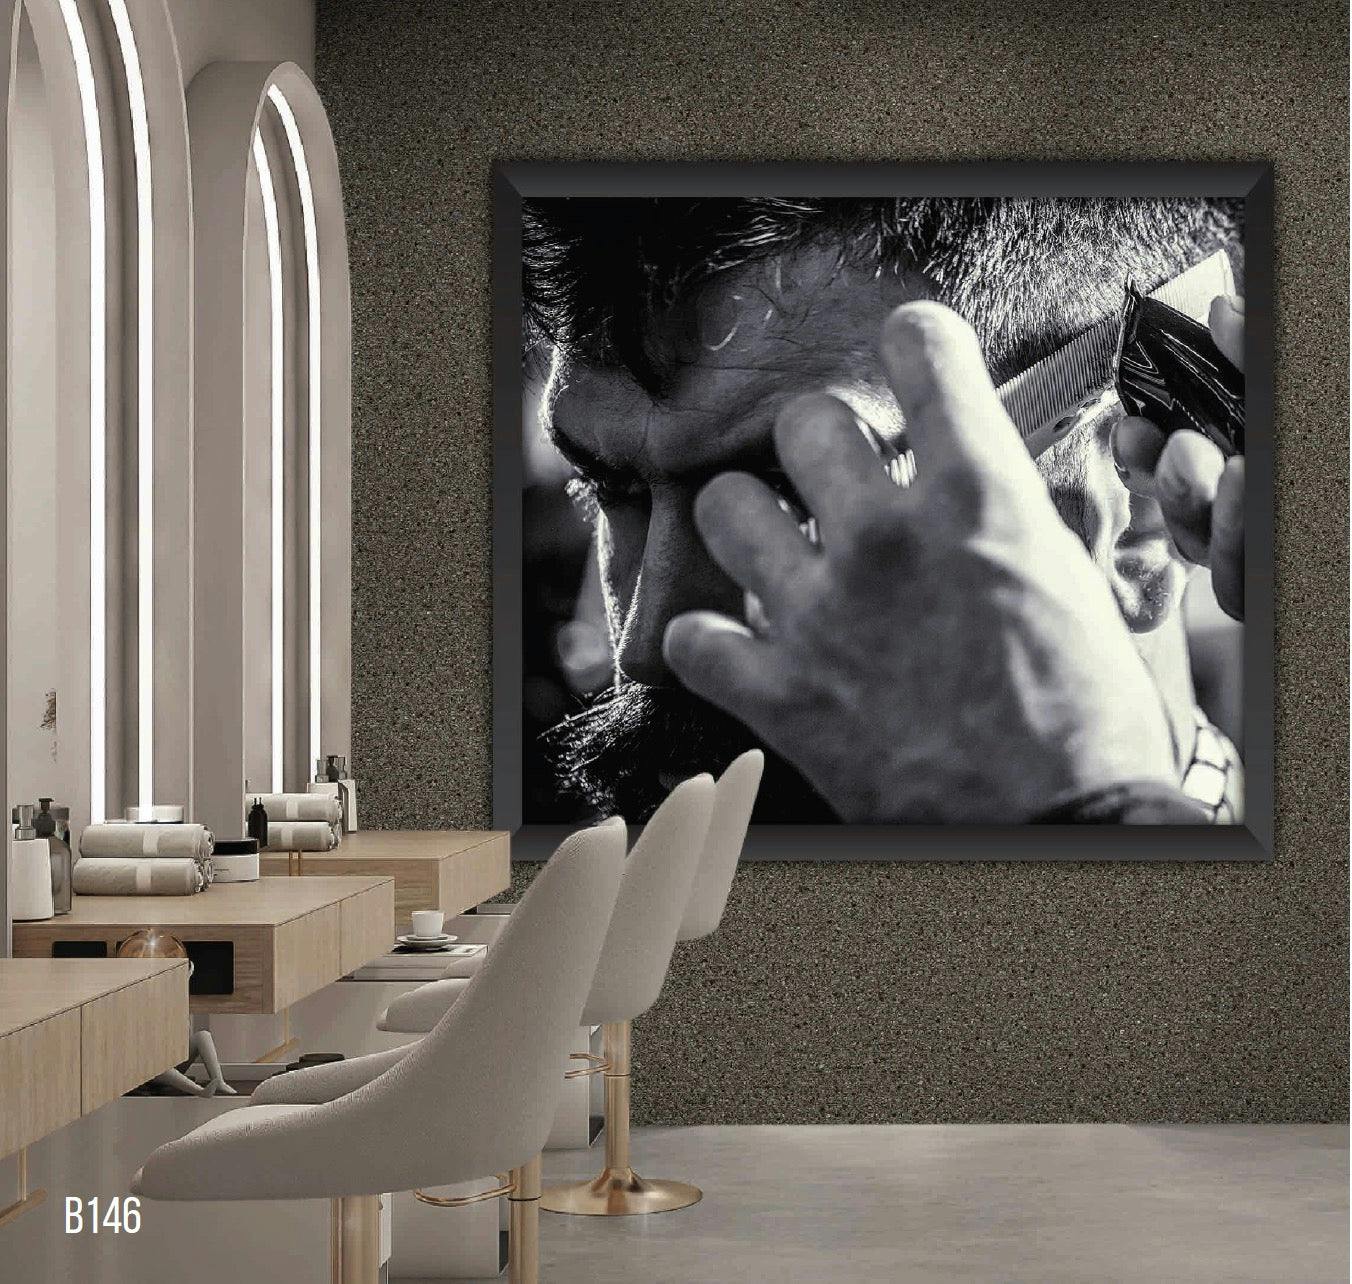 Captivating Black and White Mural